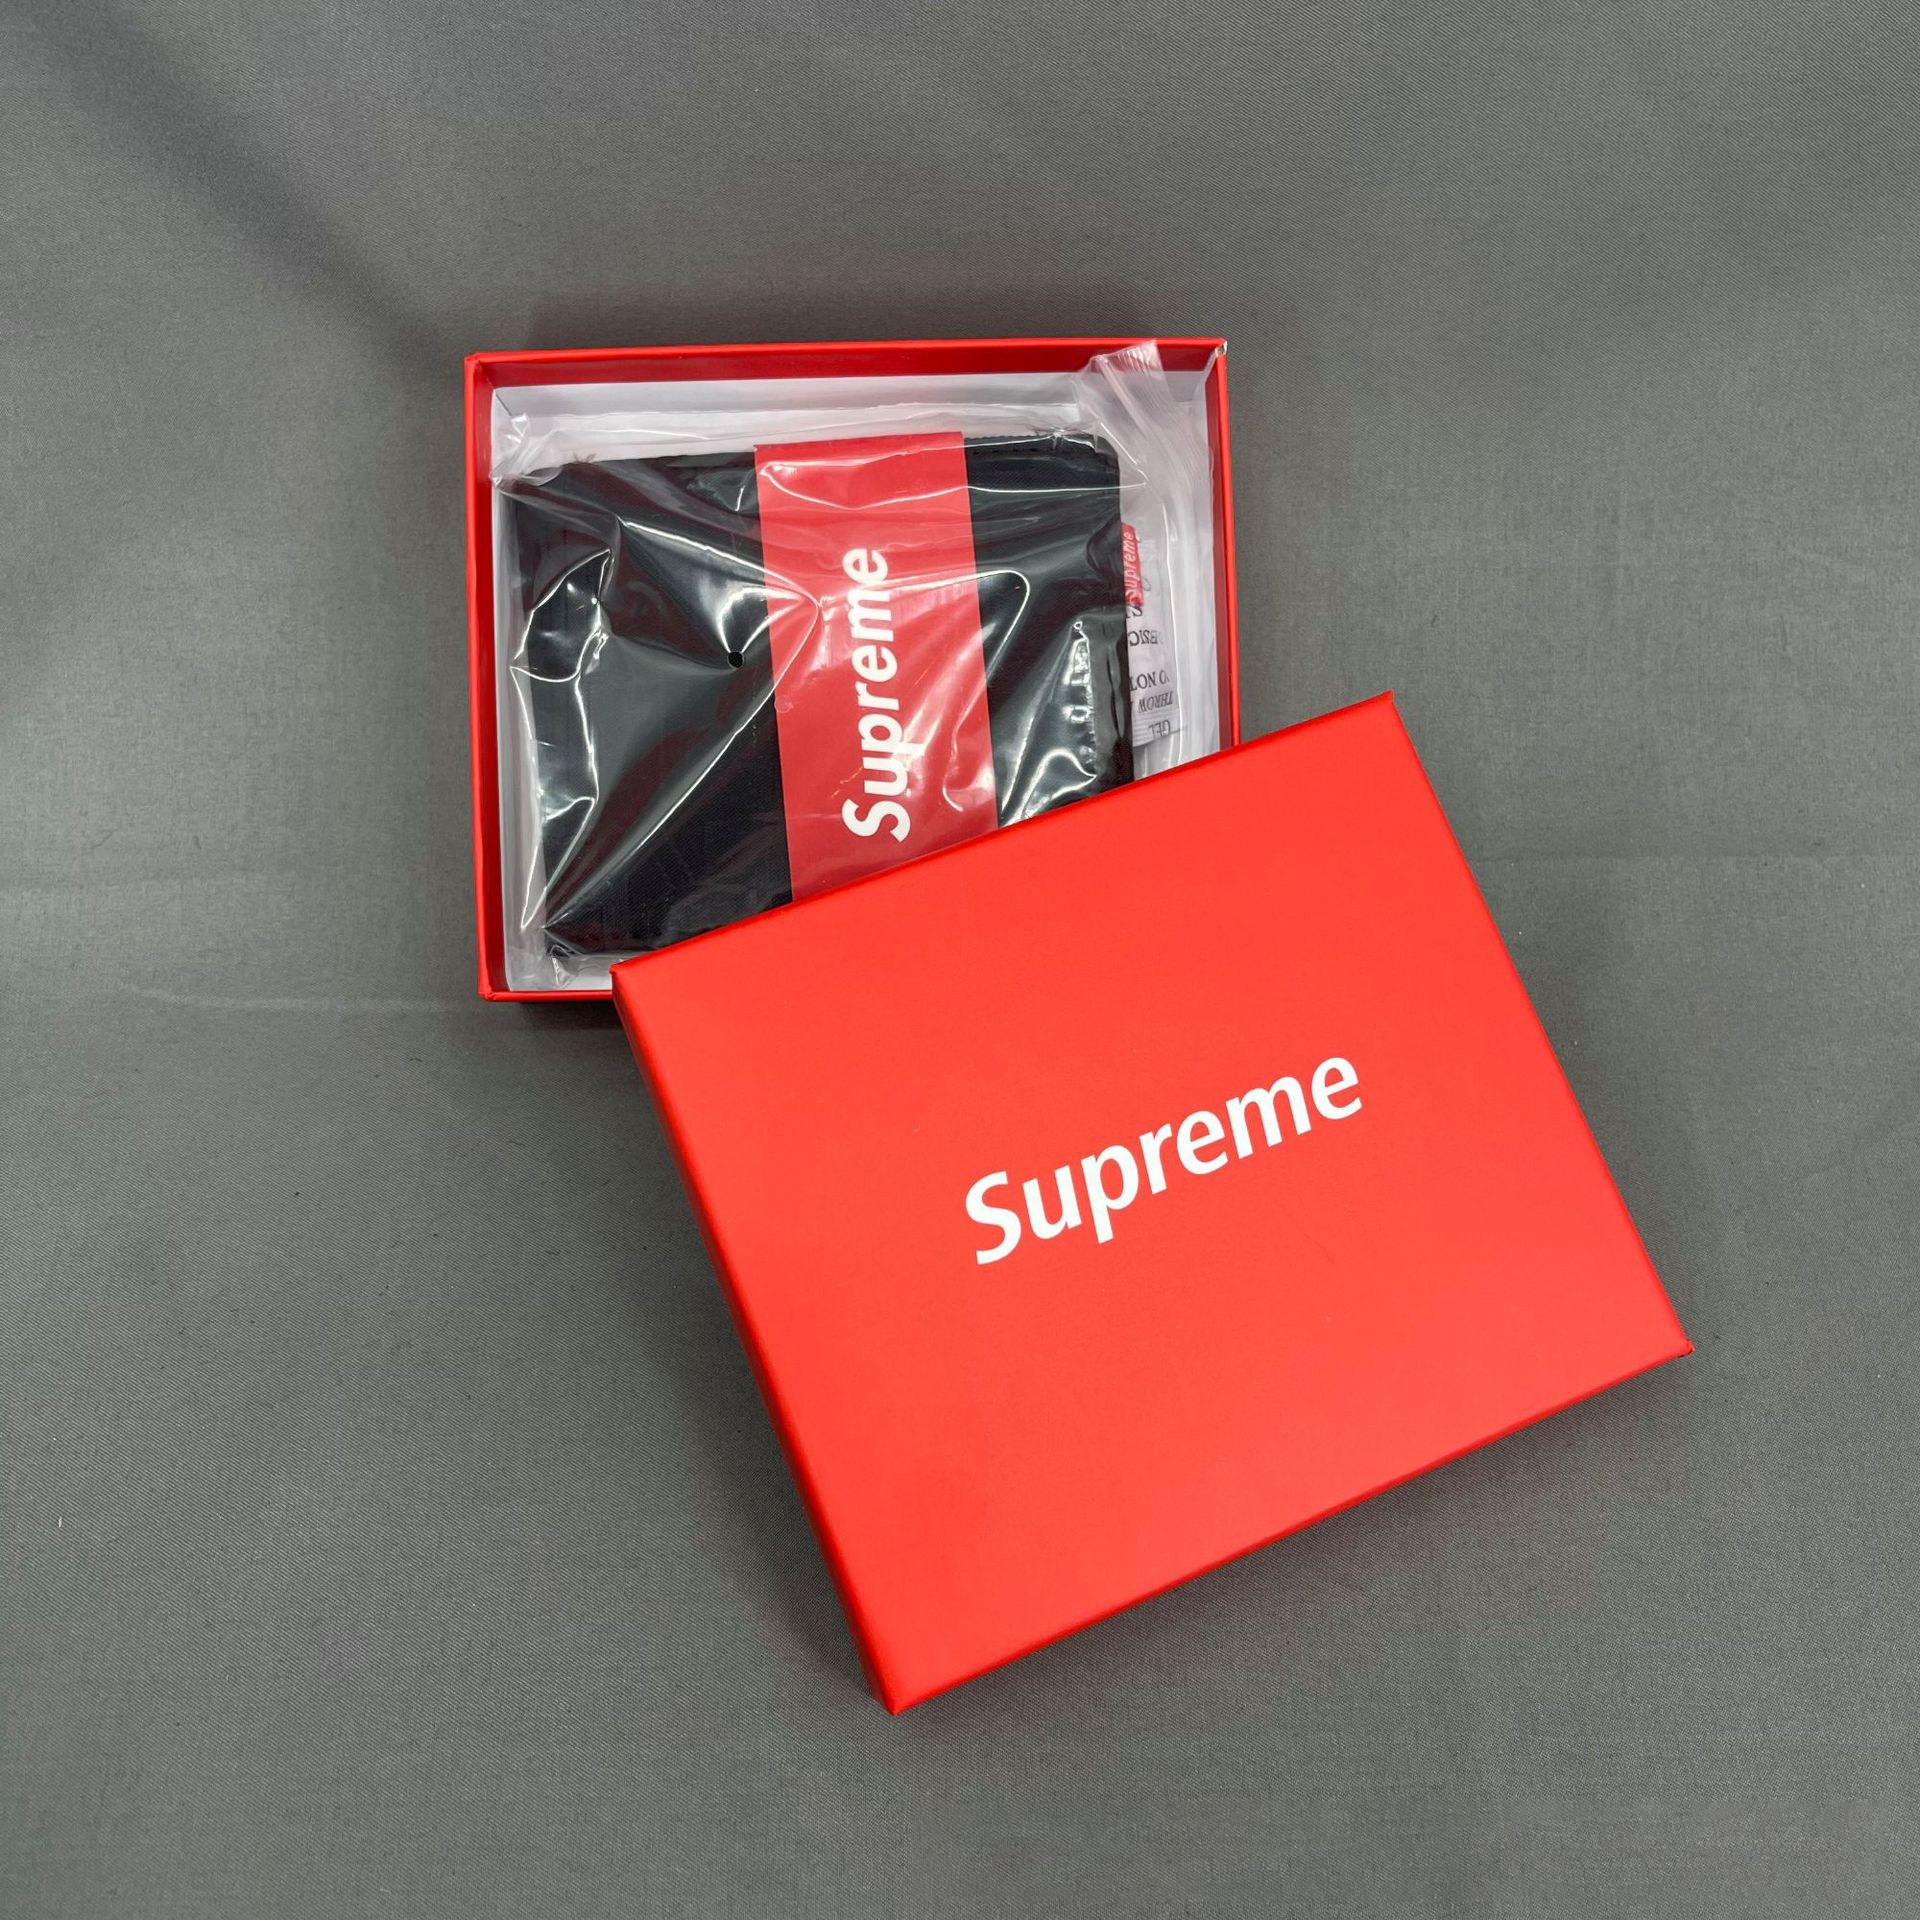 Supreme Branded Wallet For Man With Branded Gift Box - BideshBuy